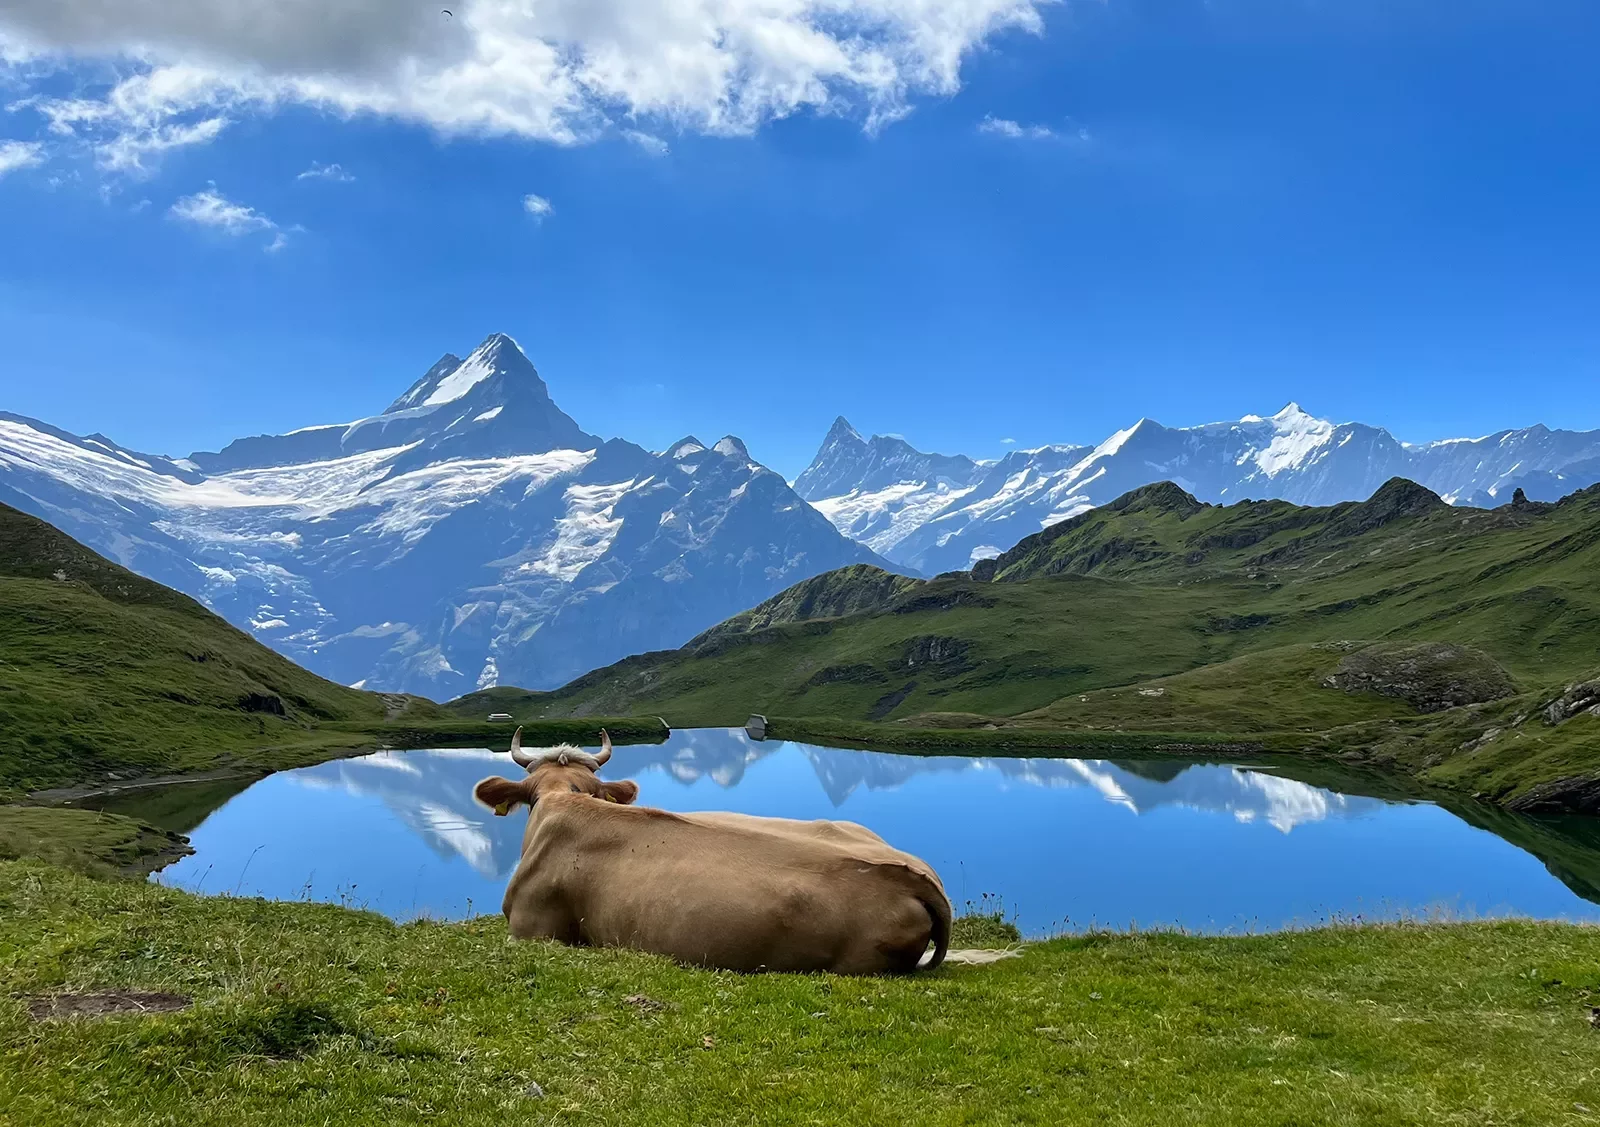 Wide shot of lake, bull in foreground, overlooking mountain.